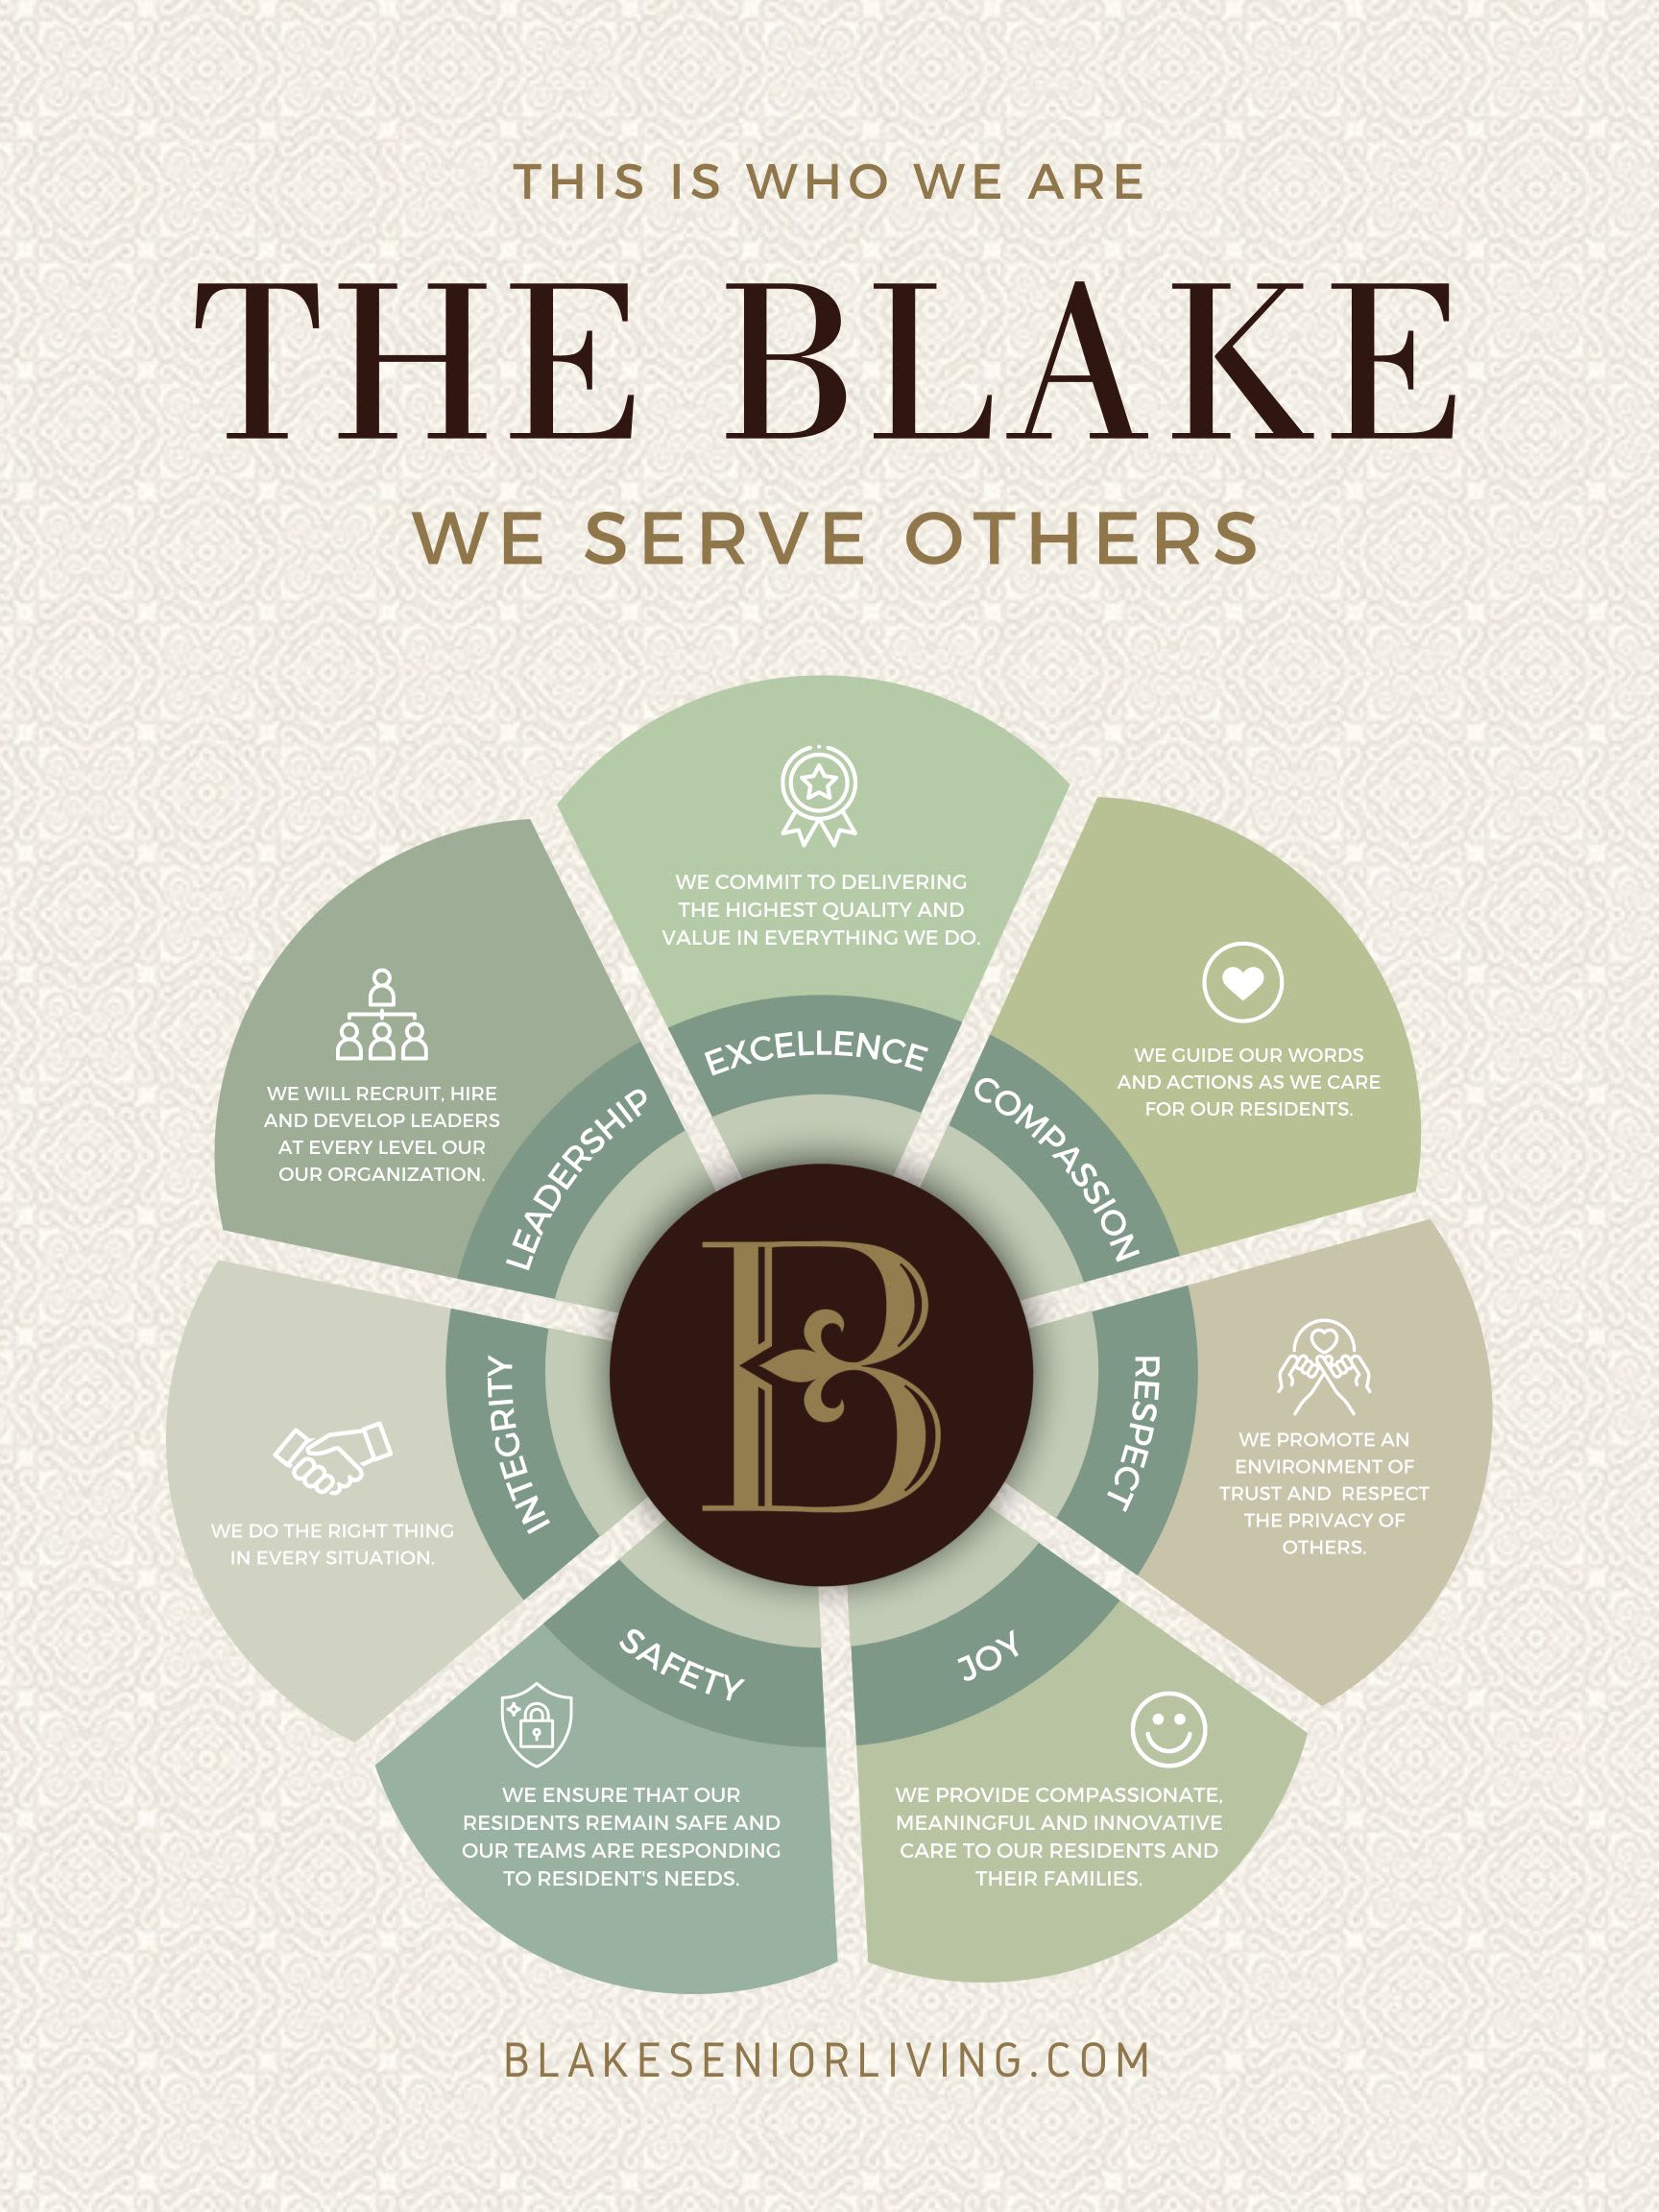 Who we are graphic The Blake